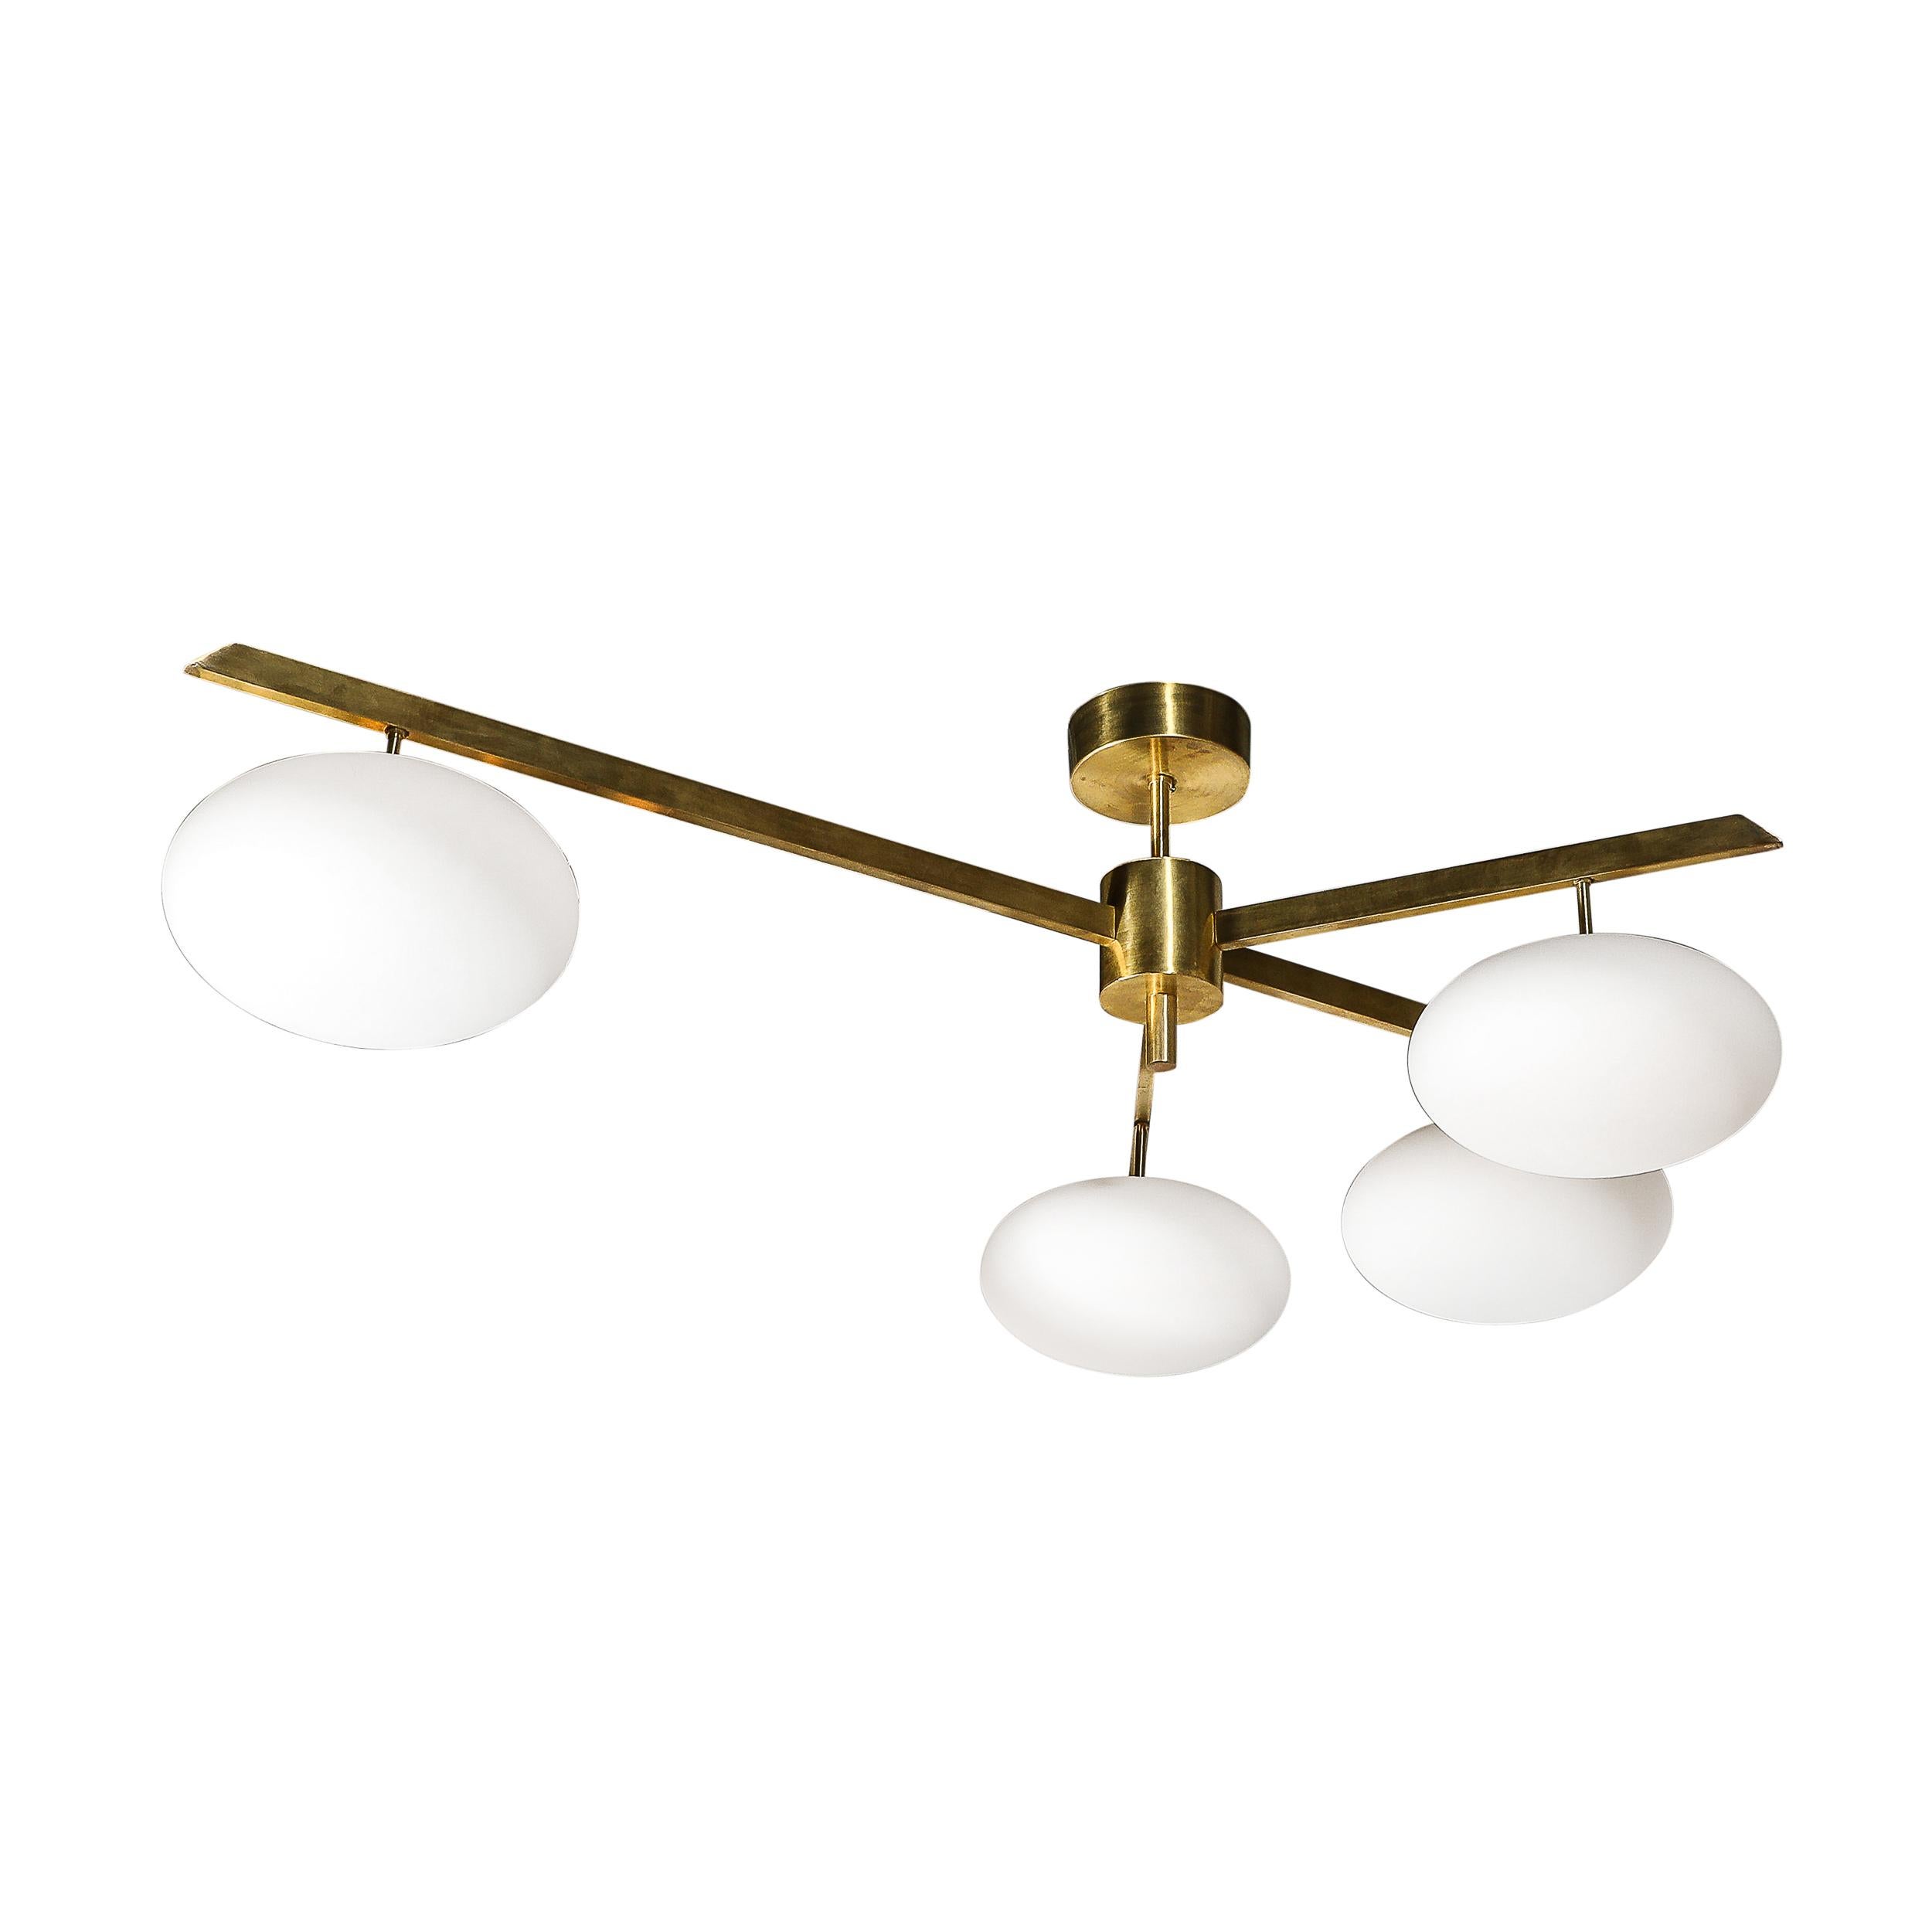 This stunning Modernist Asymmetrical Brushed Brass & Frosted Glass Four-Arm Globe Chandelier in the Manner of Arredoluce originates from Italy during the 21st Century. Features rounded hand-blown Murano Glass frosted shades which beautifully exert